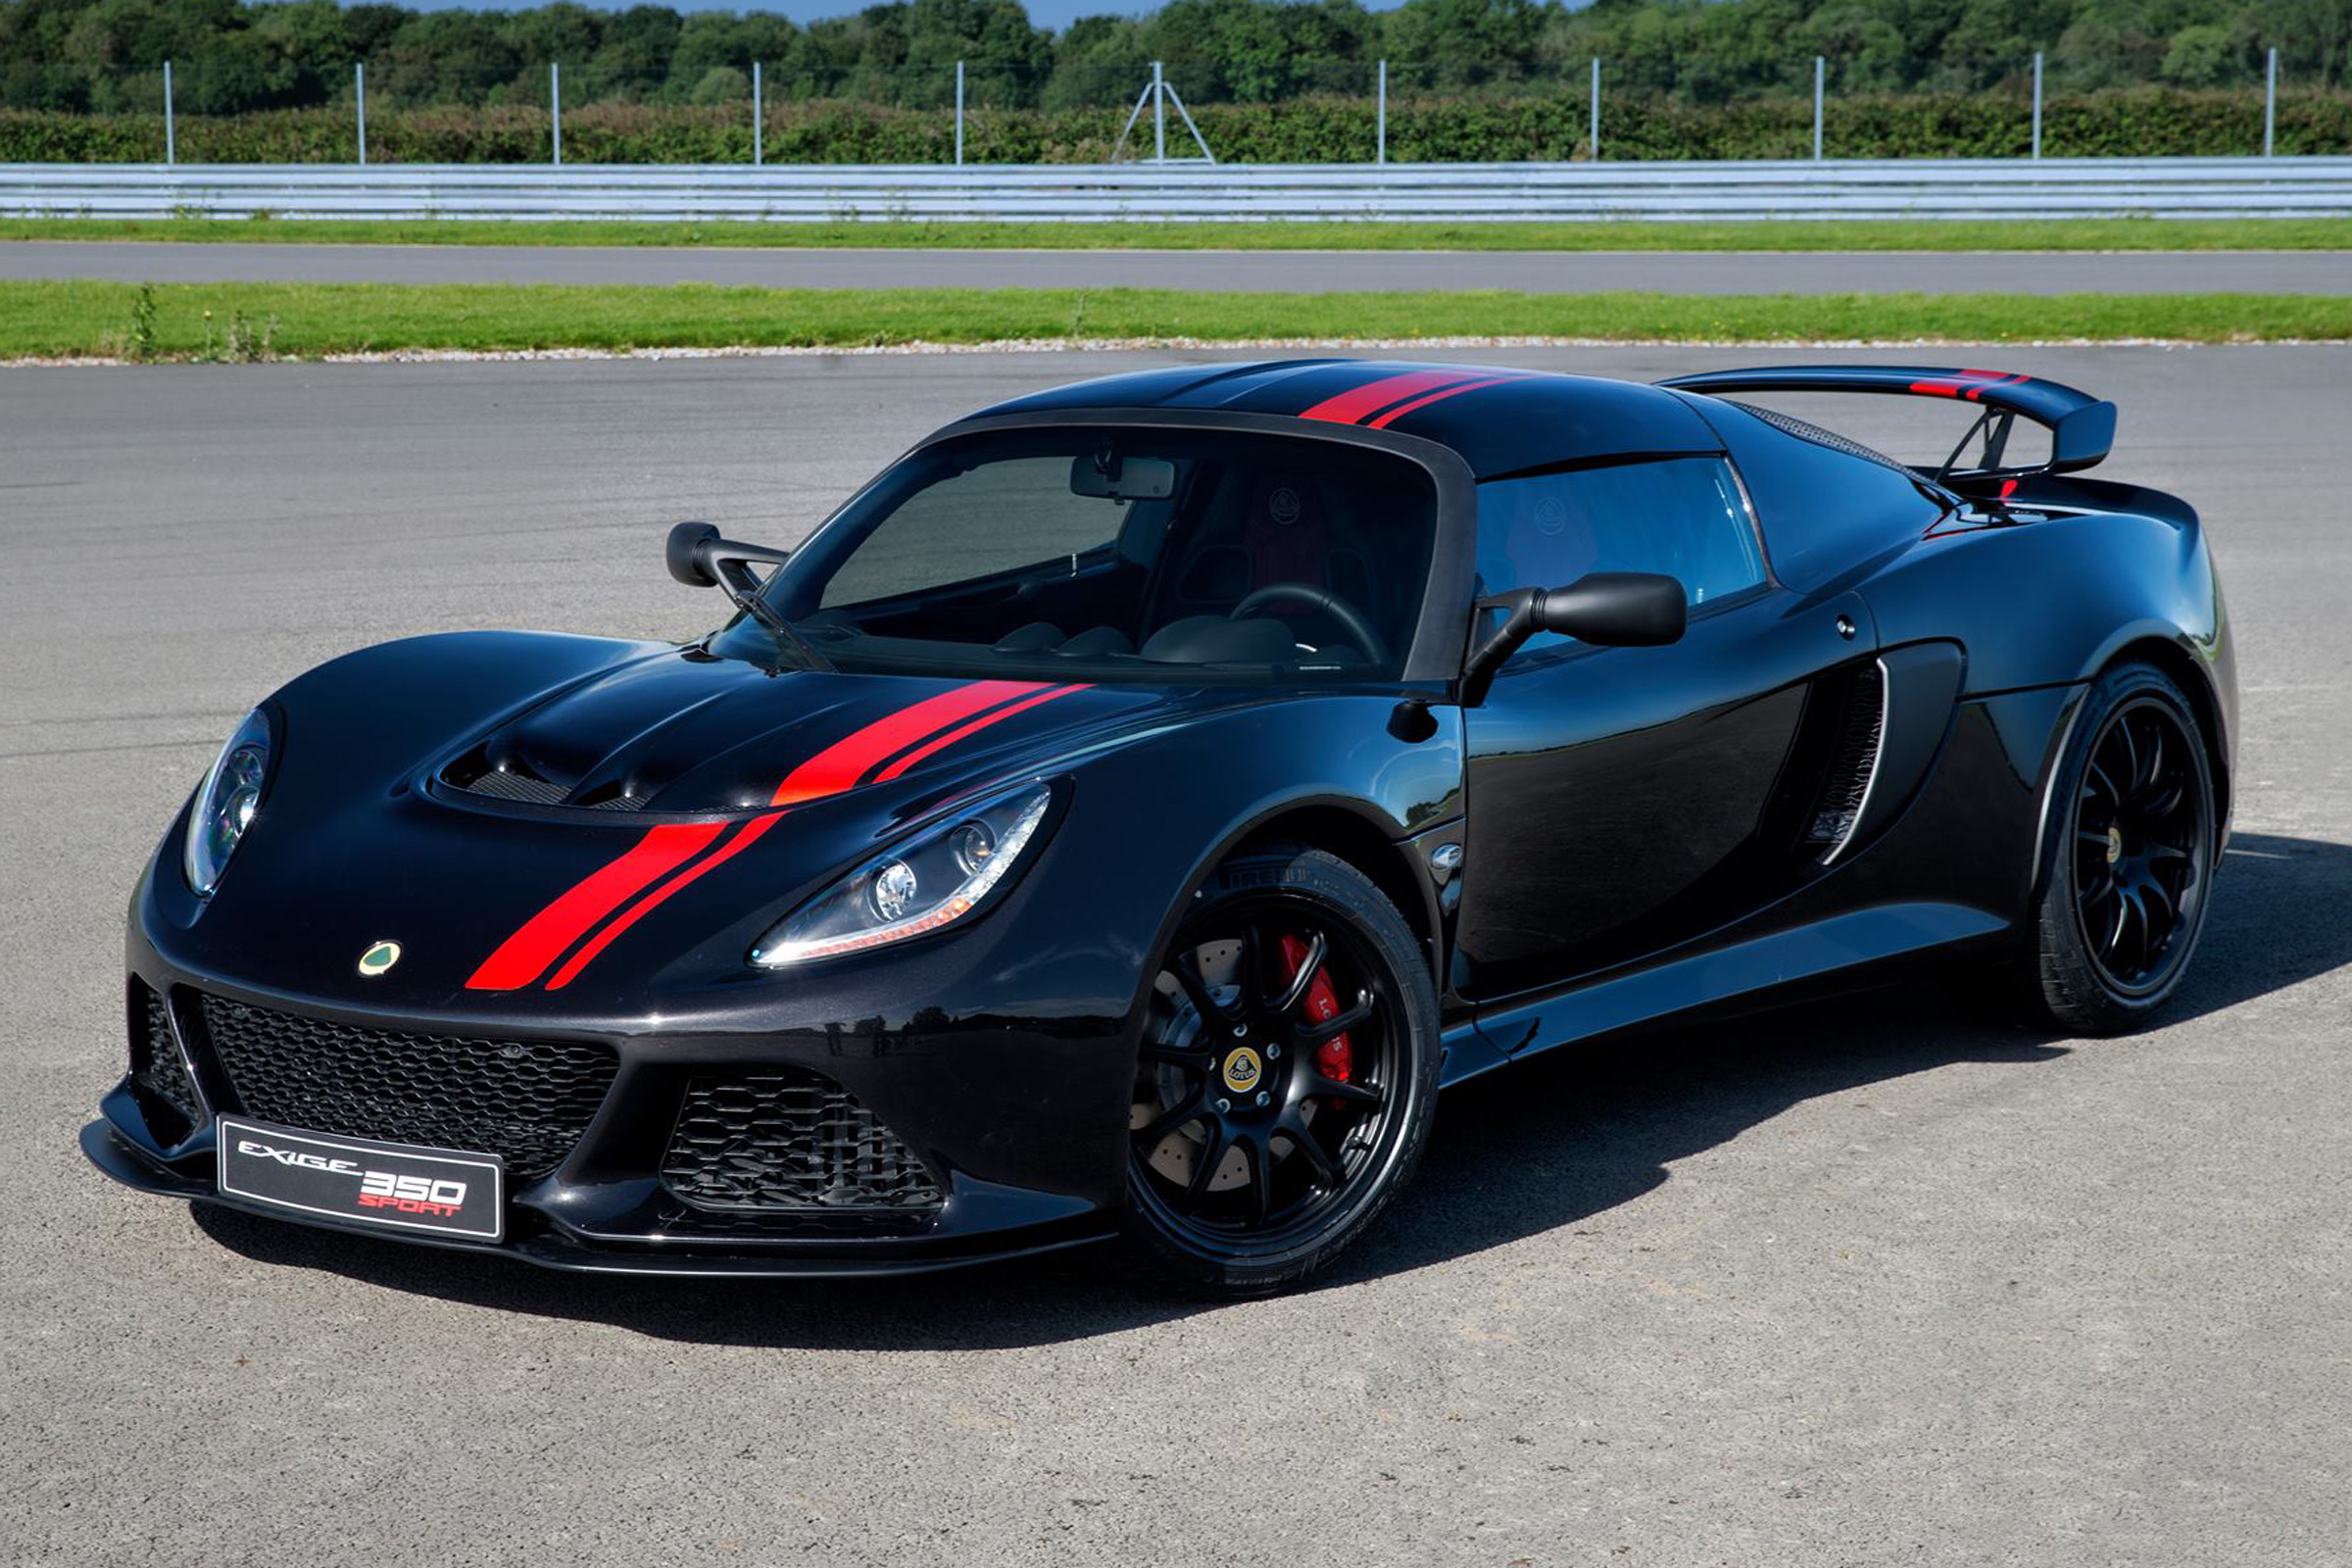 New Lotus Exige 350 Special Edition revealed | Auto Express